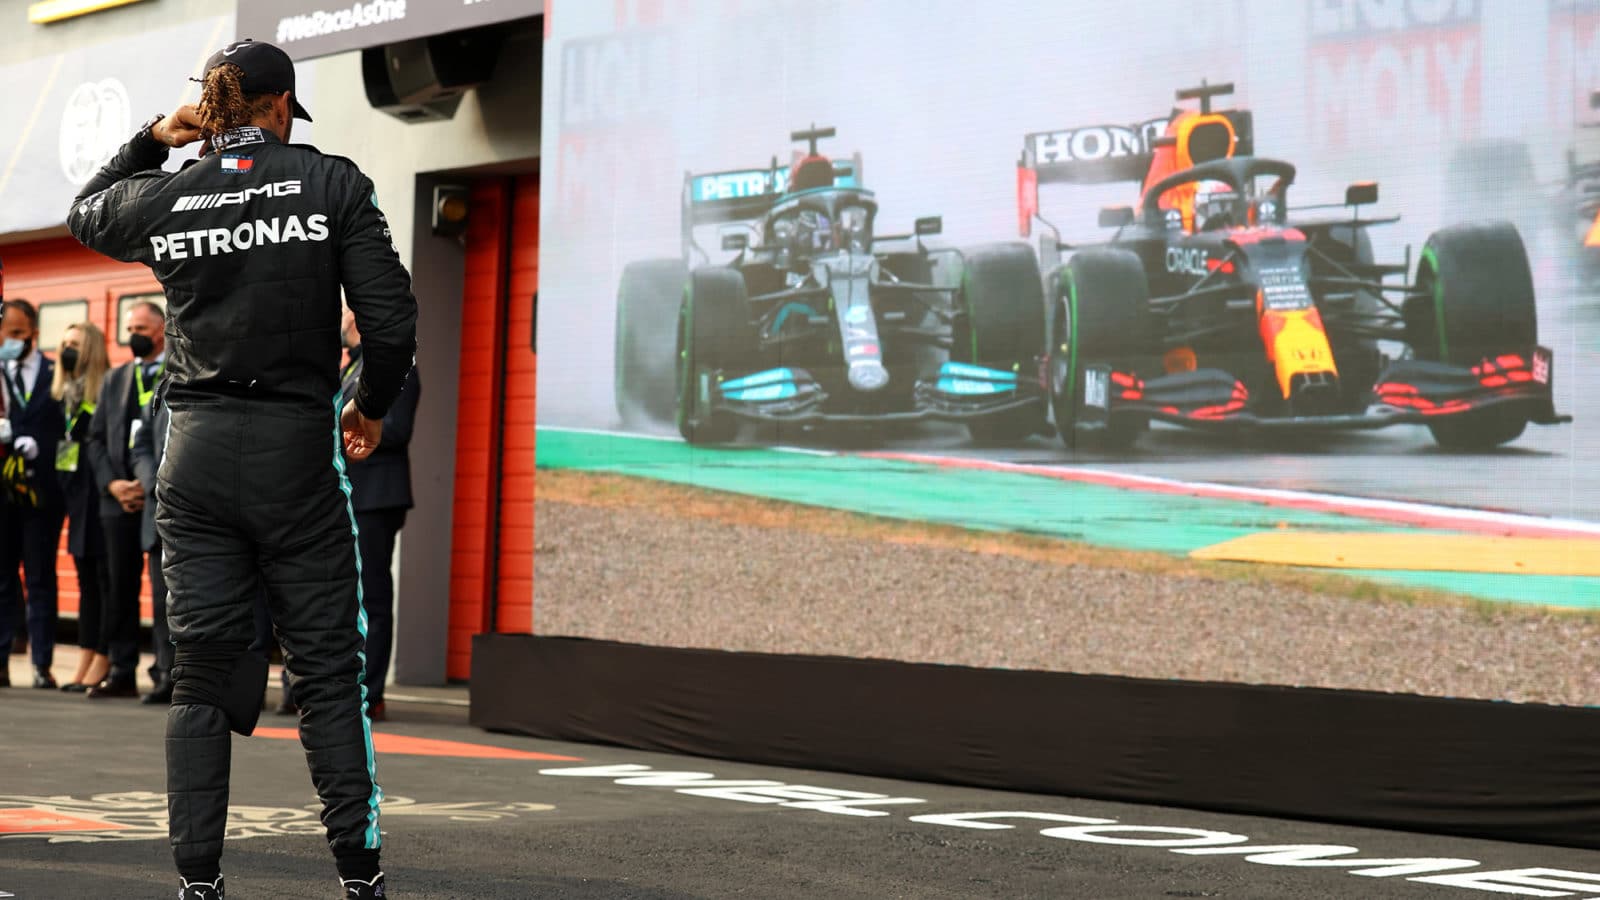 Lewis Hamilton watches his fight with Max Verstappen at the 2021 Emilia Romagna Grand Prix